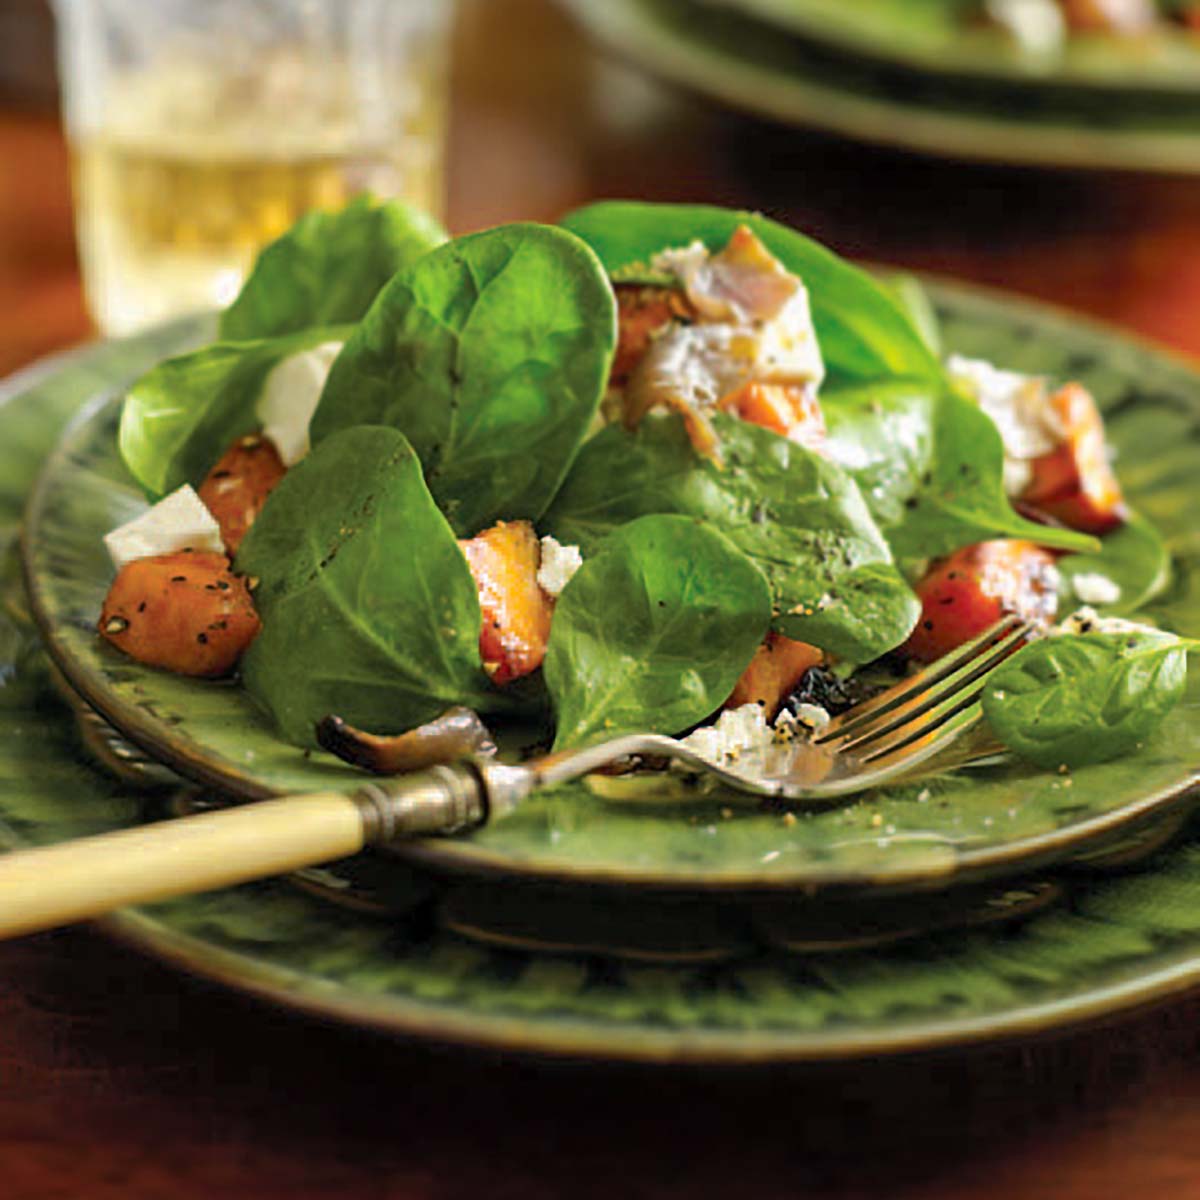 A serving of roasted sweet potato and feta salad on a green plate with a fork resting on the plate.